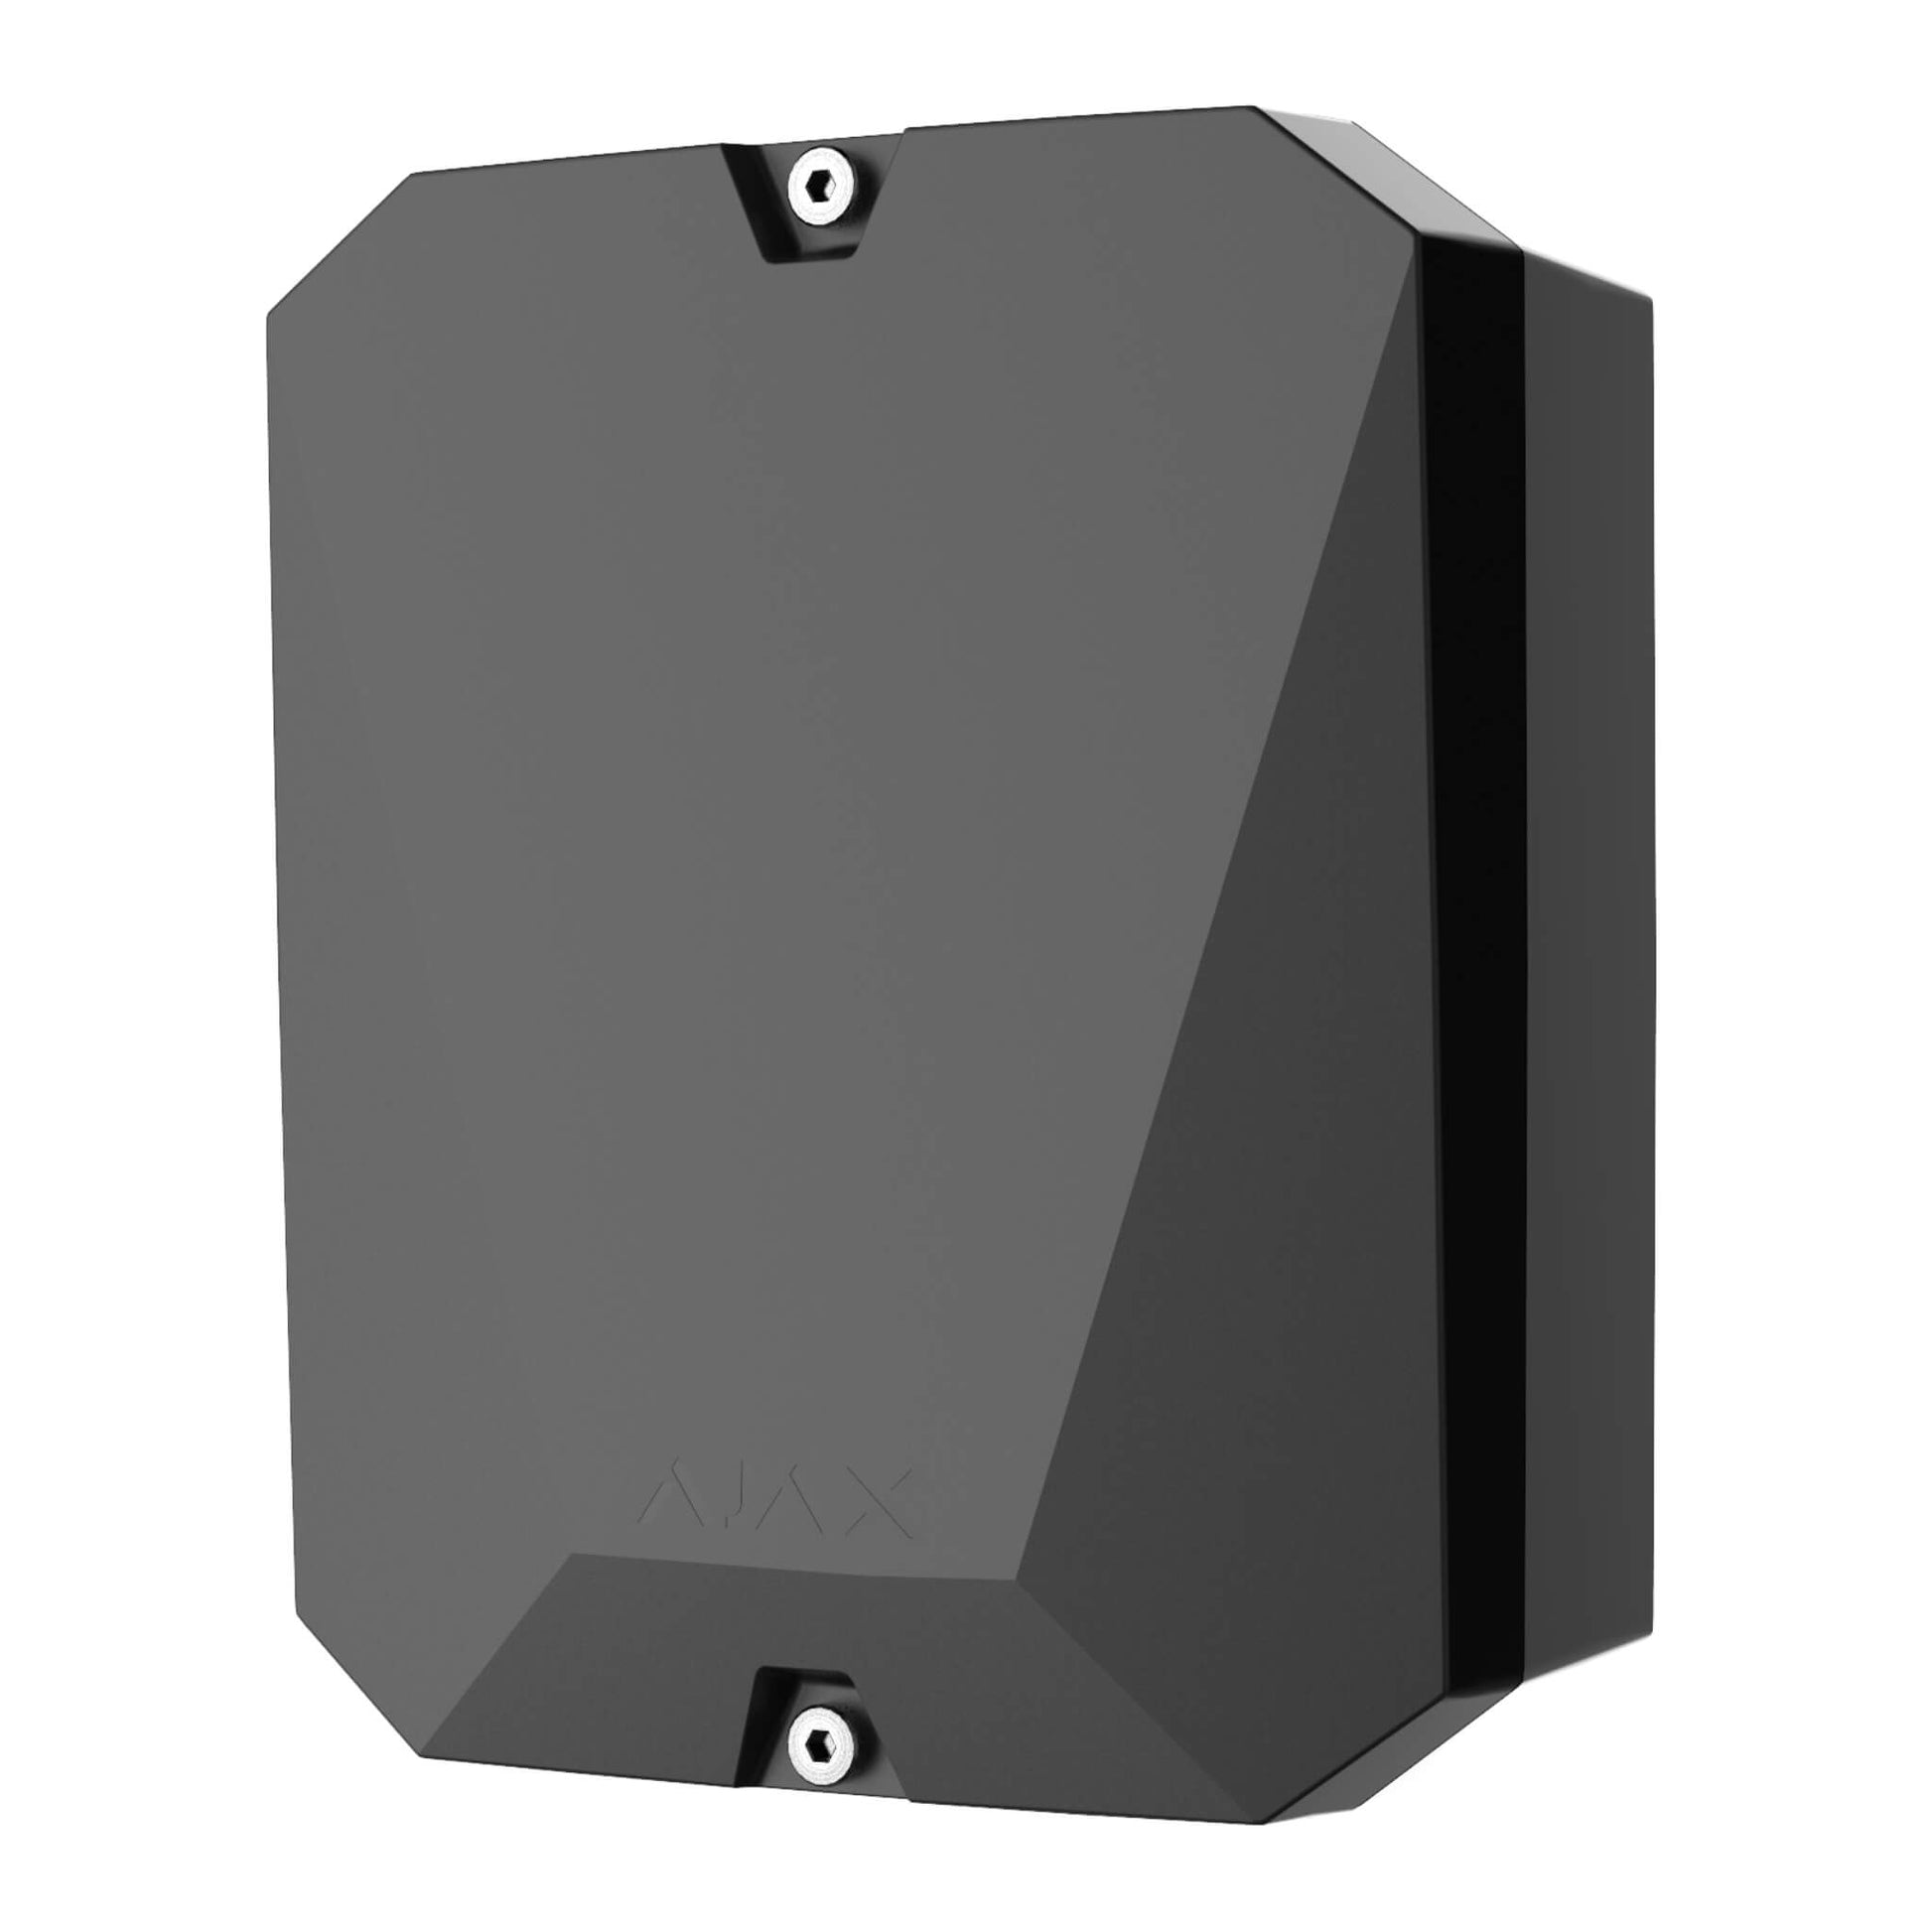 Black Ajax MultiTransmitter a third party device integration for  Ajax Security Systems, with Battery Back up capabilities , 192 × 238 × 100 mm in size, 805 grams in weight. Buy Ajax Security Online , Front View of Device.